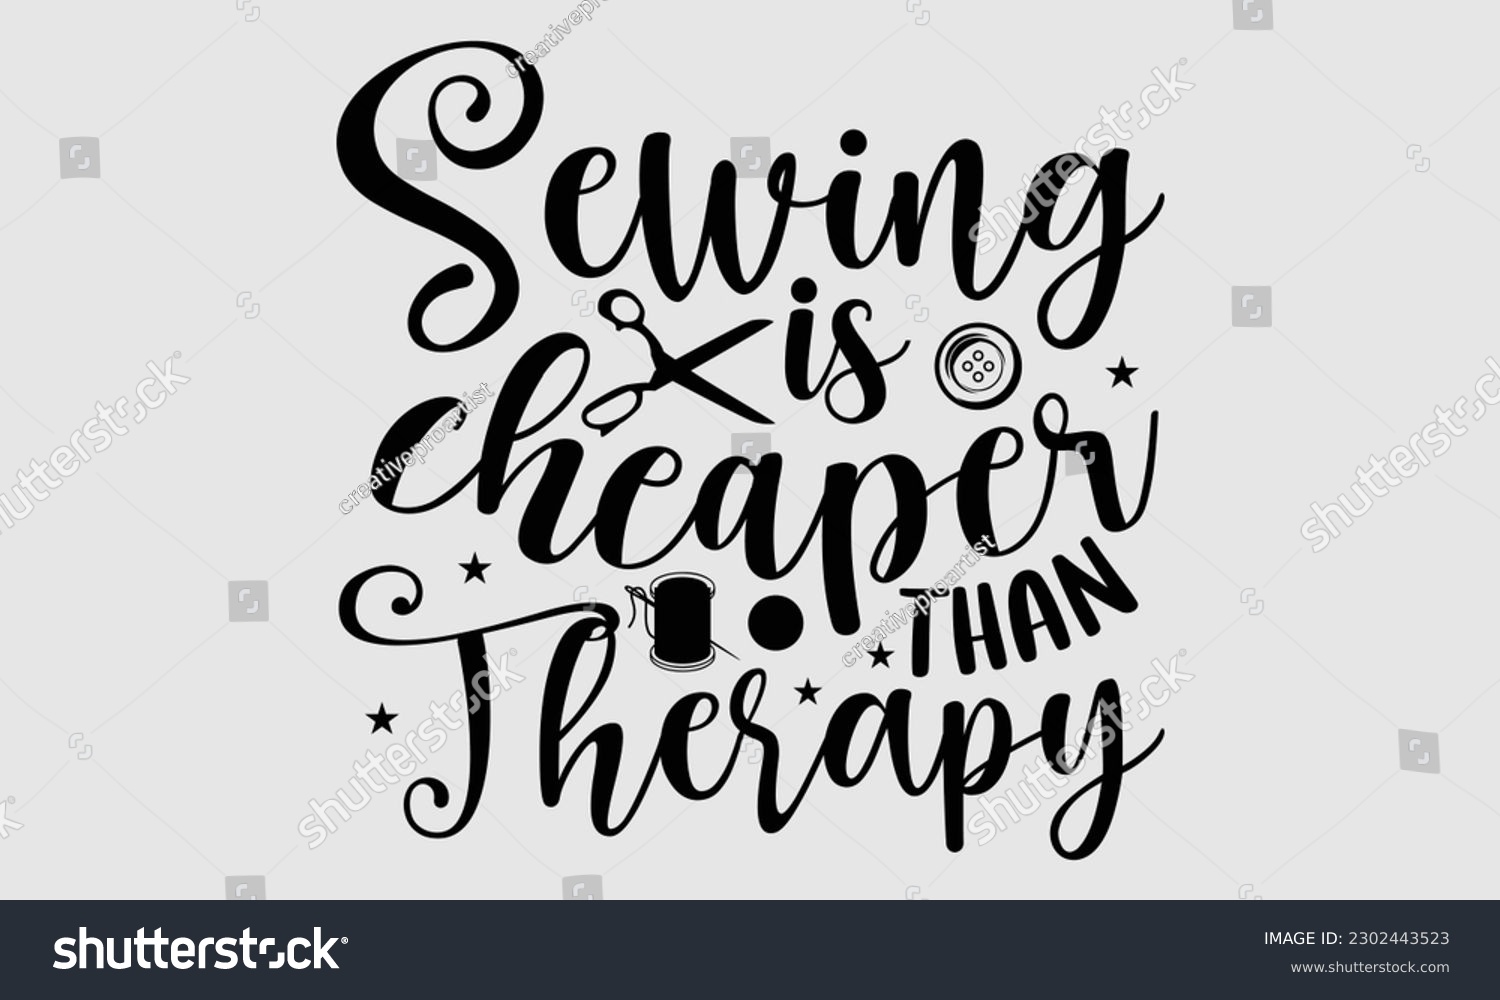 SVG of Sewing is cheaper than therapy- Sewing t- shirt design, Hand drawn vintage illustration for prints on eps, svg Files for Cutting, greeting card template with typography text svg